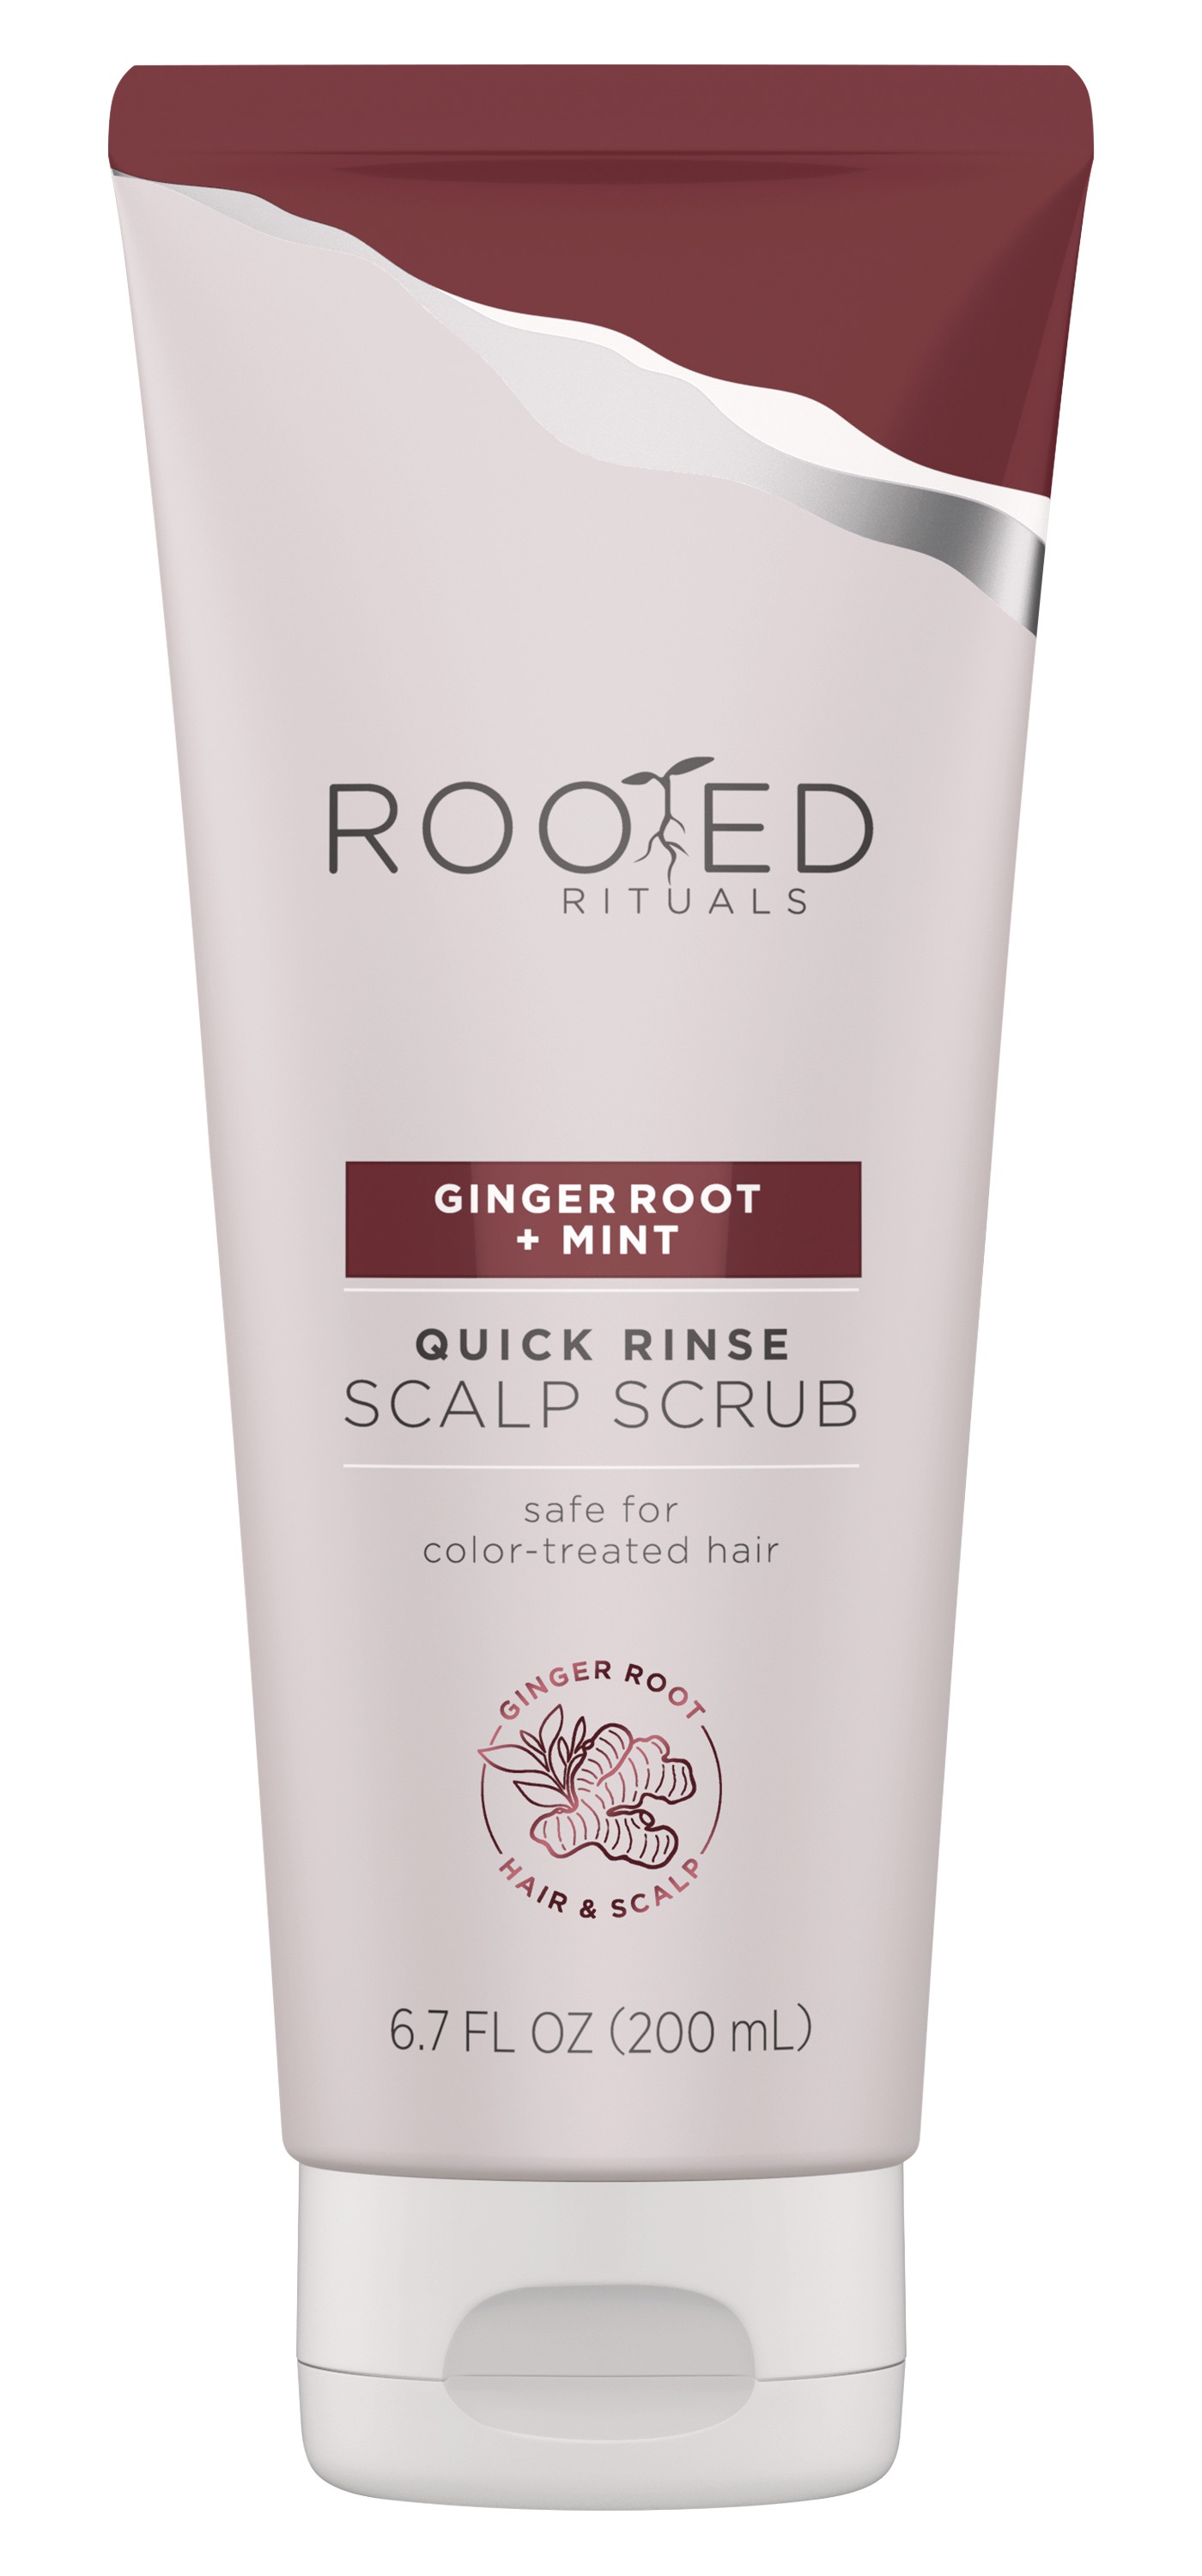 Rooted Rituals Ginger Root And Mint Quick-Rinse Scalp Scrub